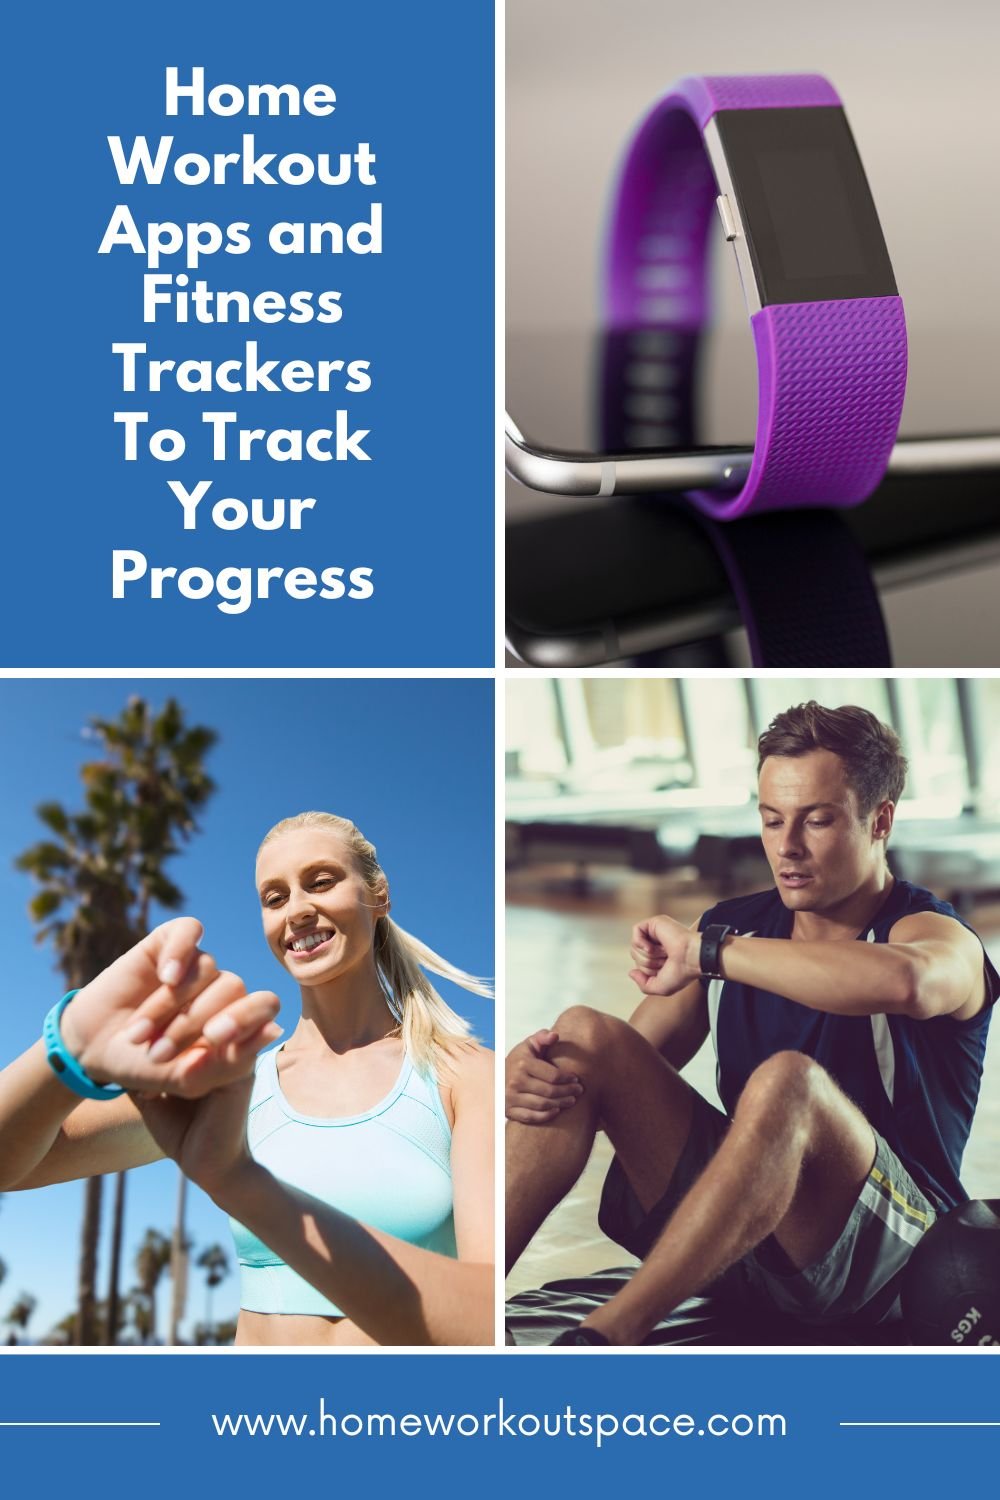 Home Workout Apps and Fitness Trackers